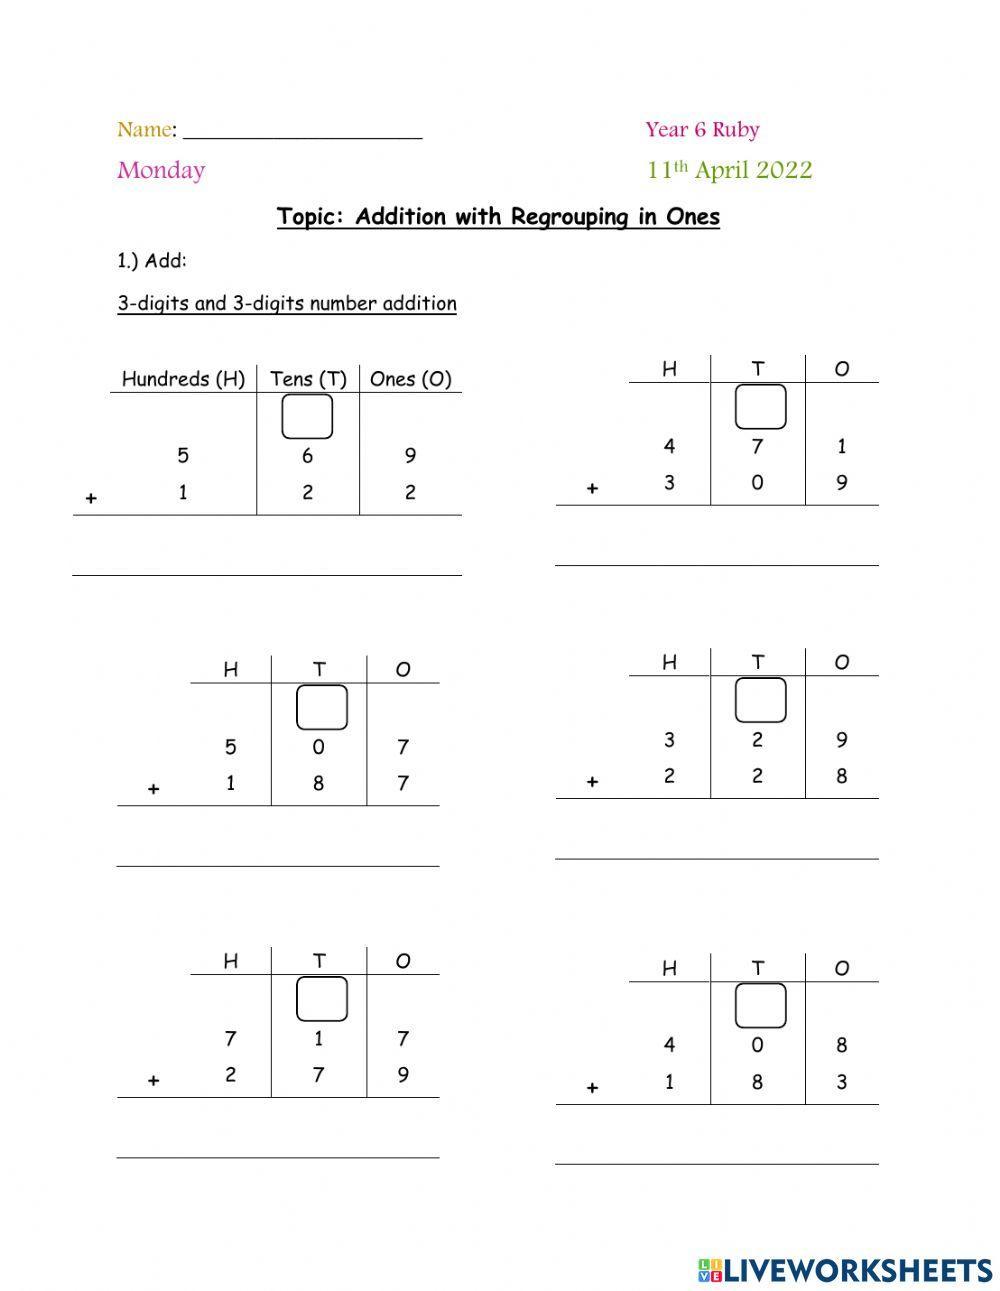 Addition with regrouping in ones (3-digits)